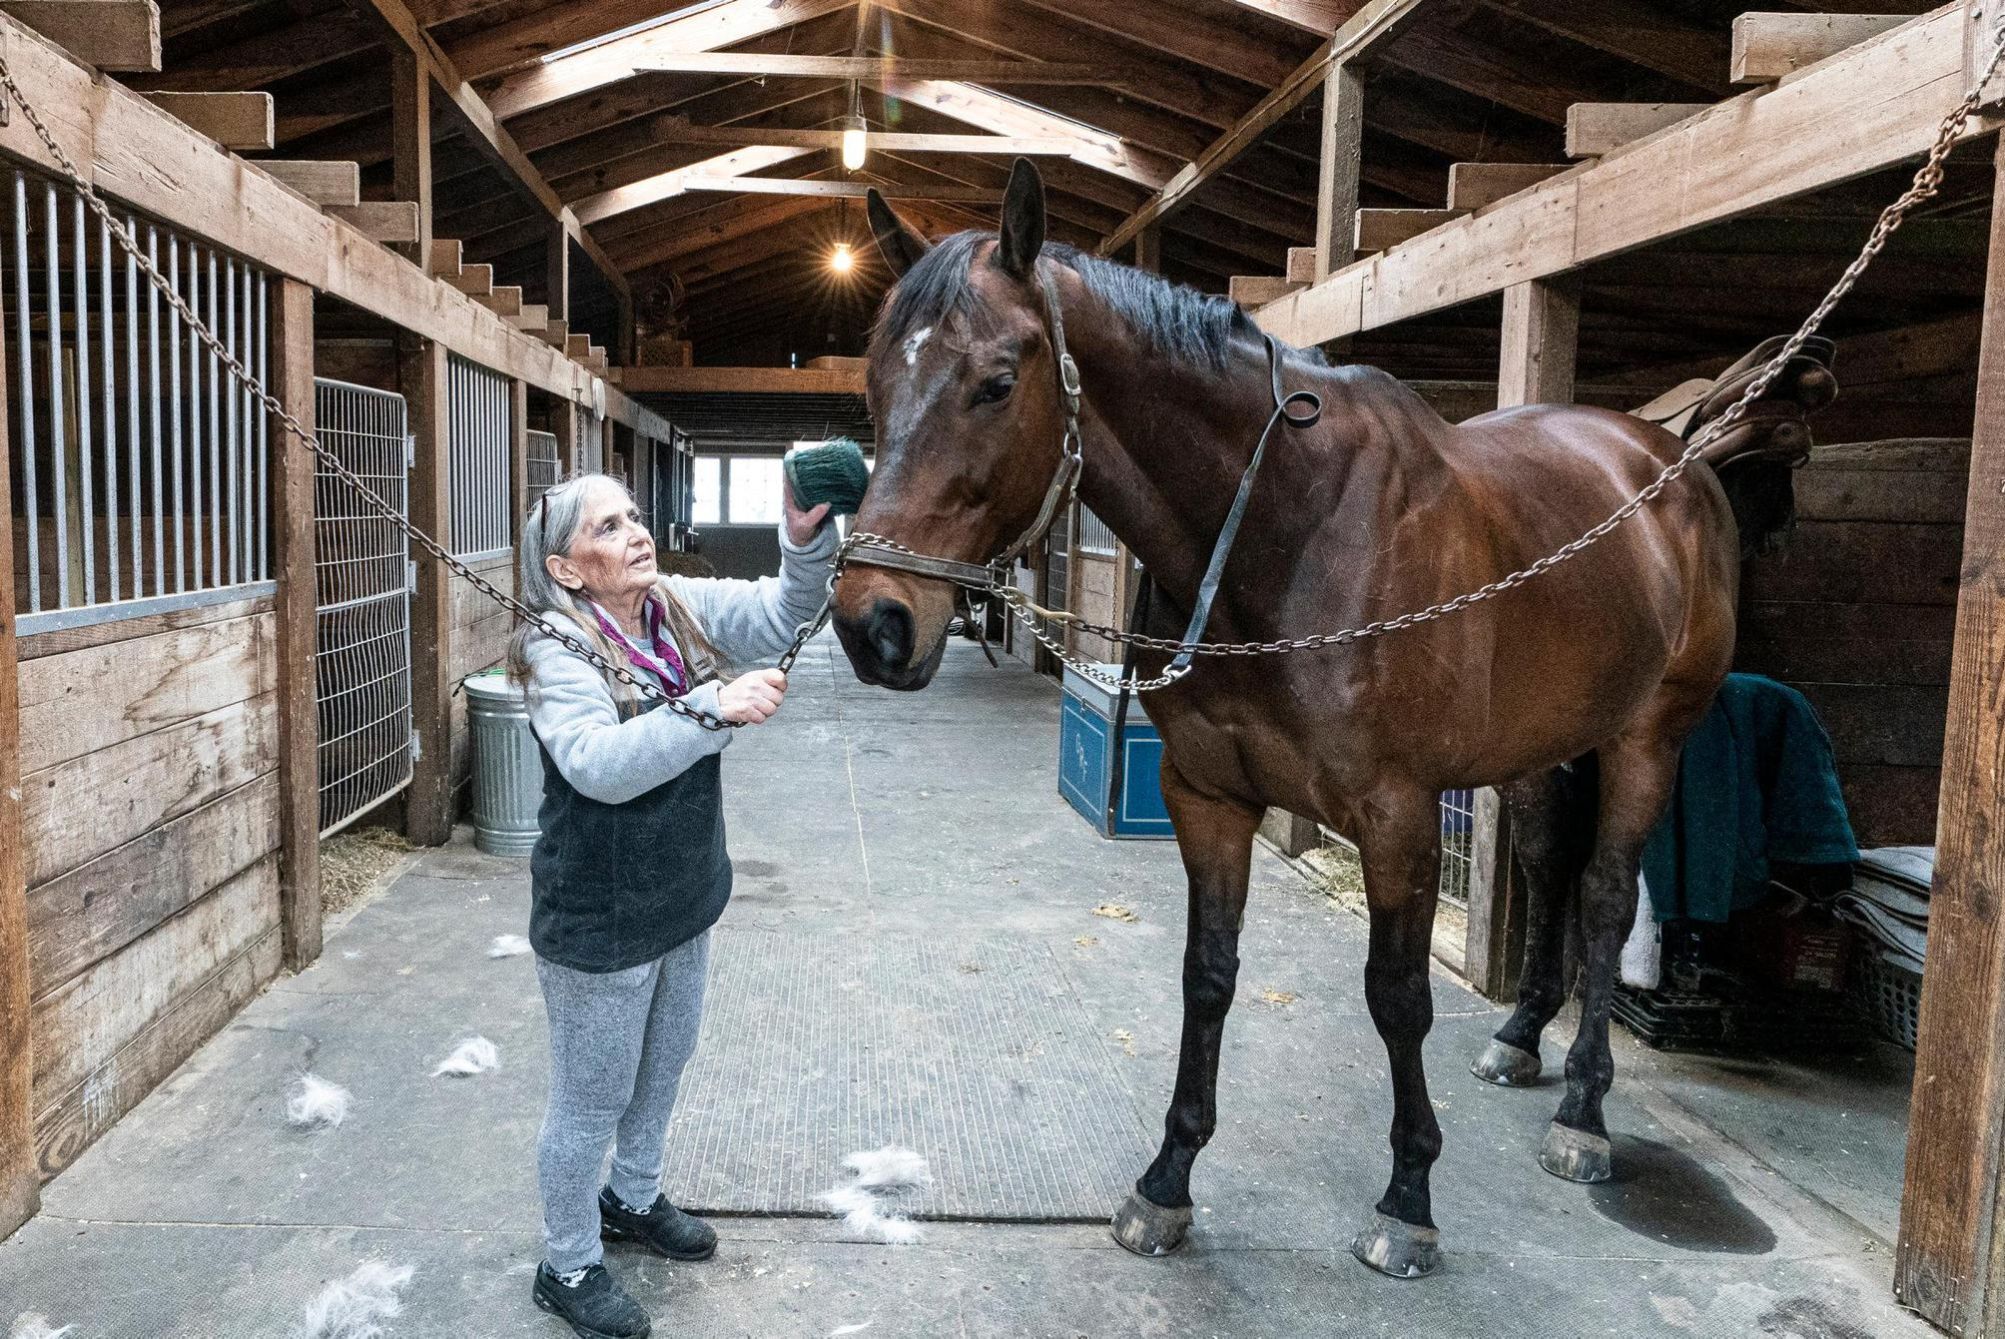 Horse Stables And Barns Struggle To Stay Afloat Care For Animals Amid Covid 19 Newsday,How Long To Cook Chicken Breast In Crock Pot